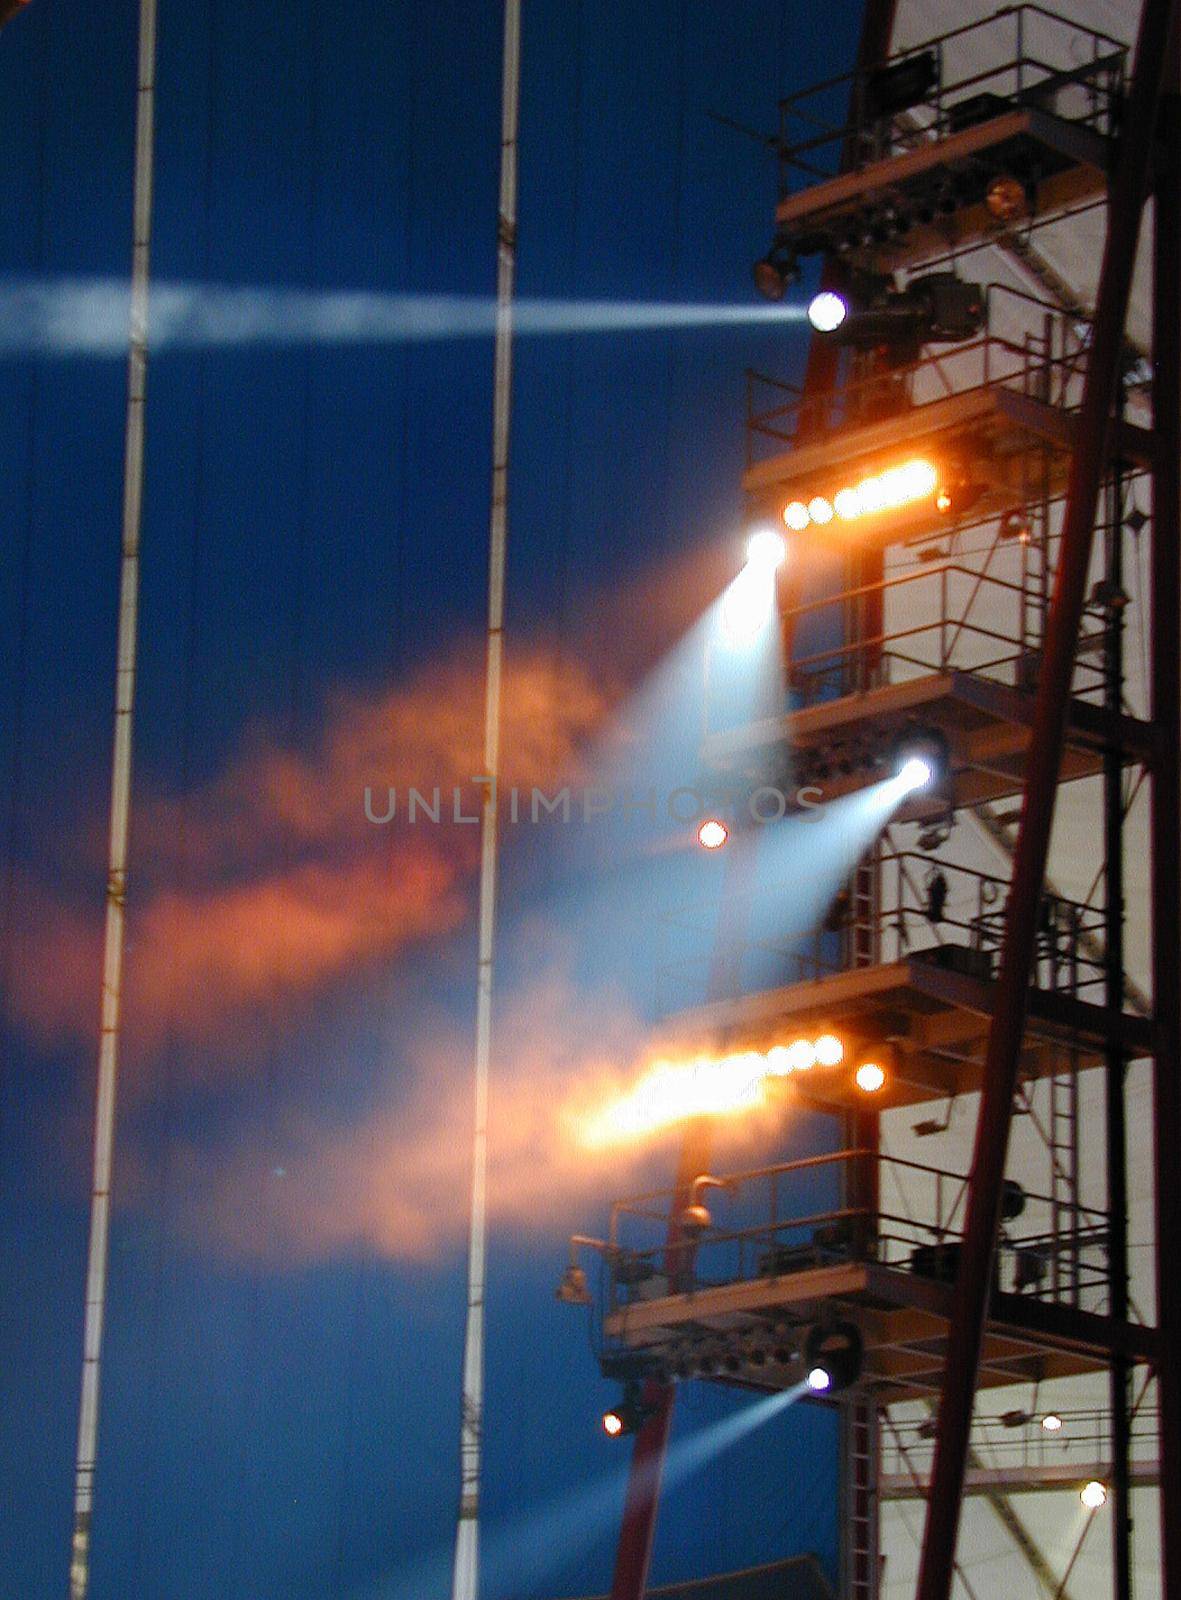 Tower supporting spotlights at a circus show arranged on various levels in assorted colors beaming down at night